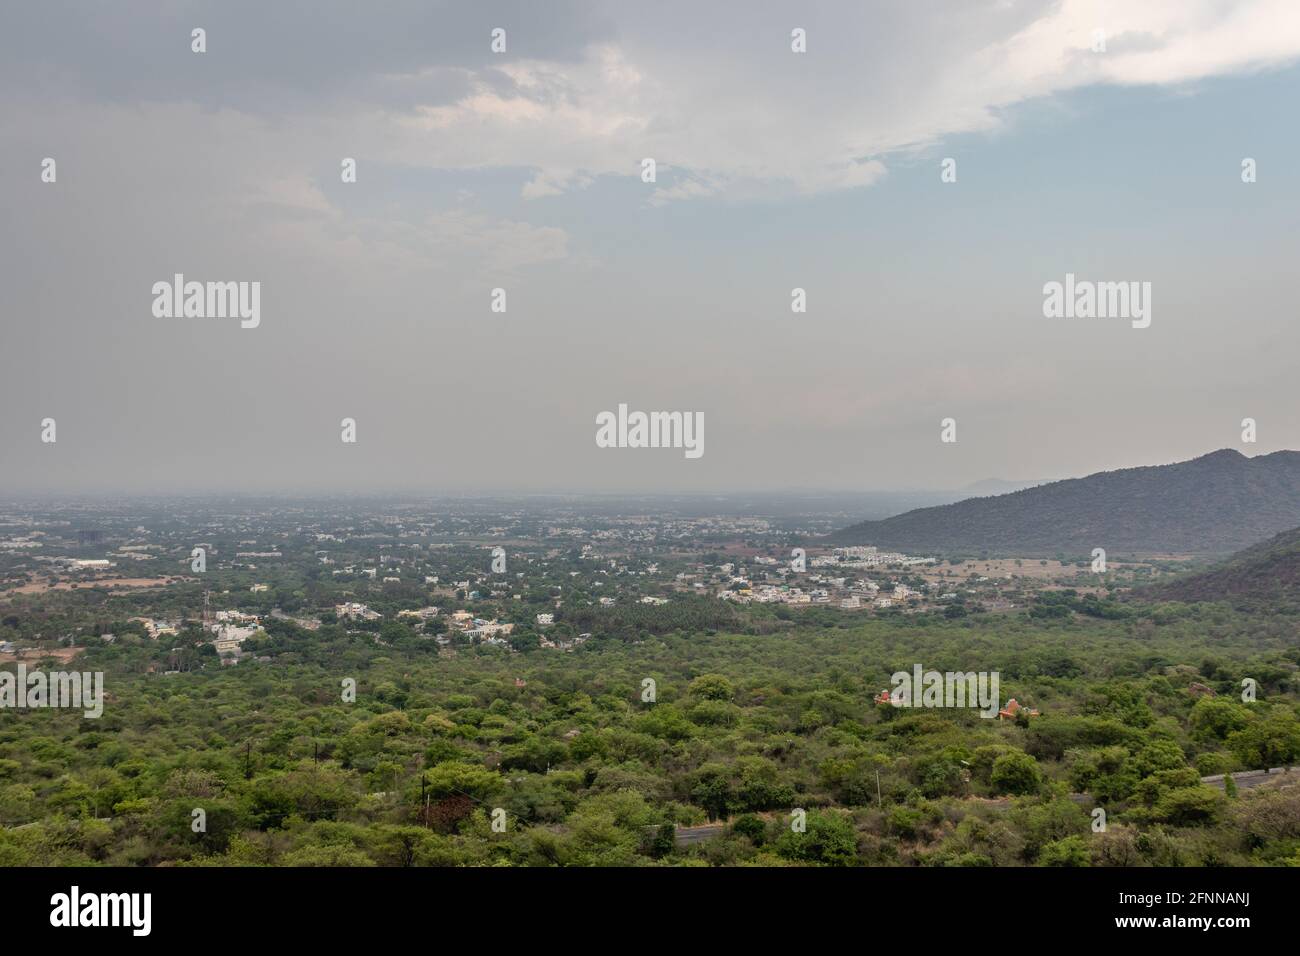 City View from hill top image is taken from marudhmalai temple which is in coimbatore tamilnadu india. Stock Photo